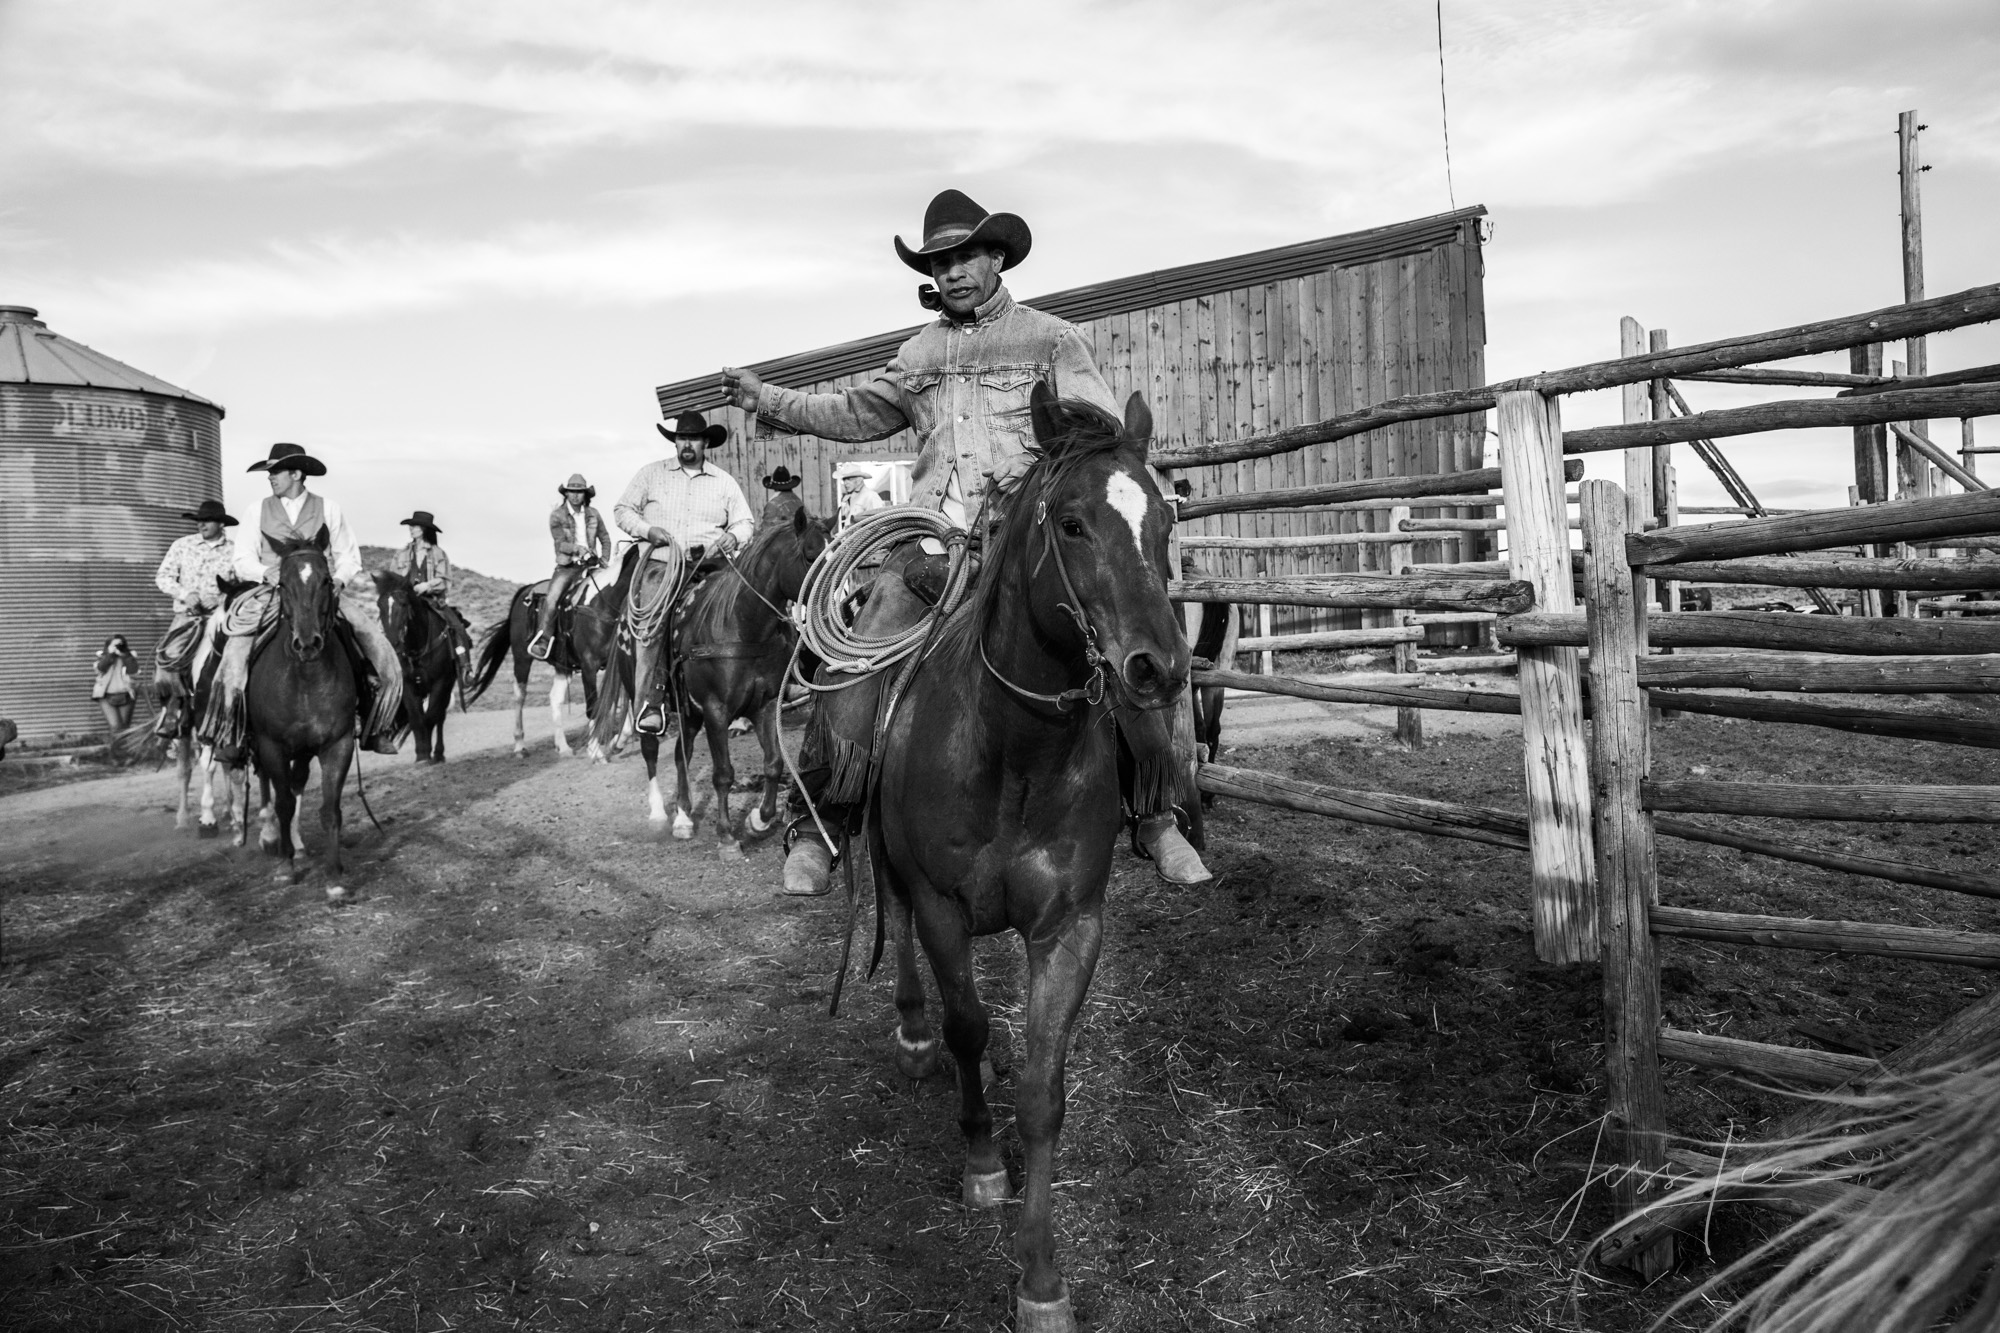 Fine Art Limited Edition Photo Prints of Cowboys, Horses, and life in the West. Head'n out. A Cowboy picture in black and white...